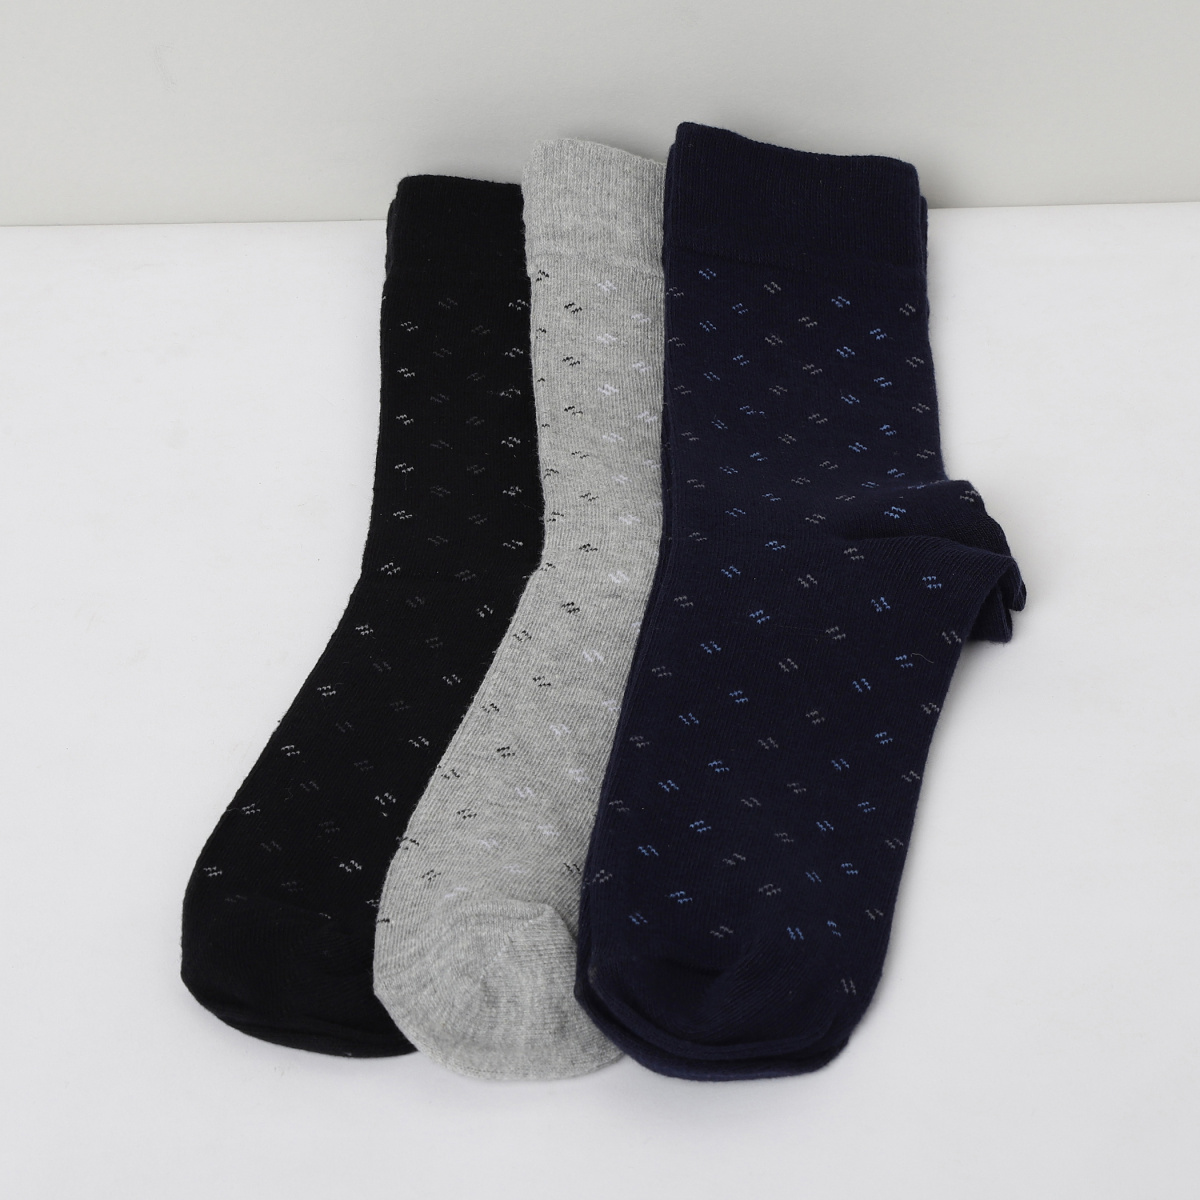 MAX Patterned Socks - Pack of 3